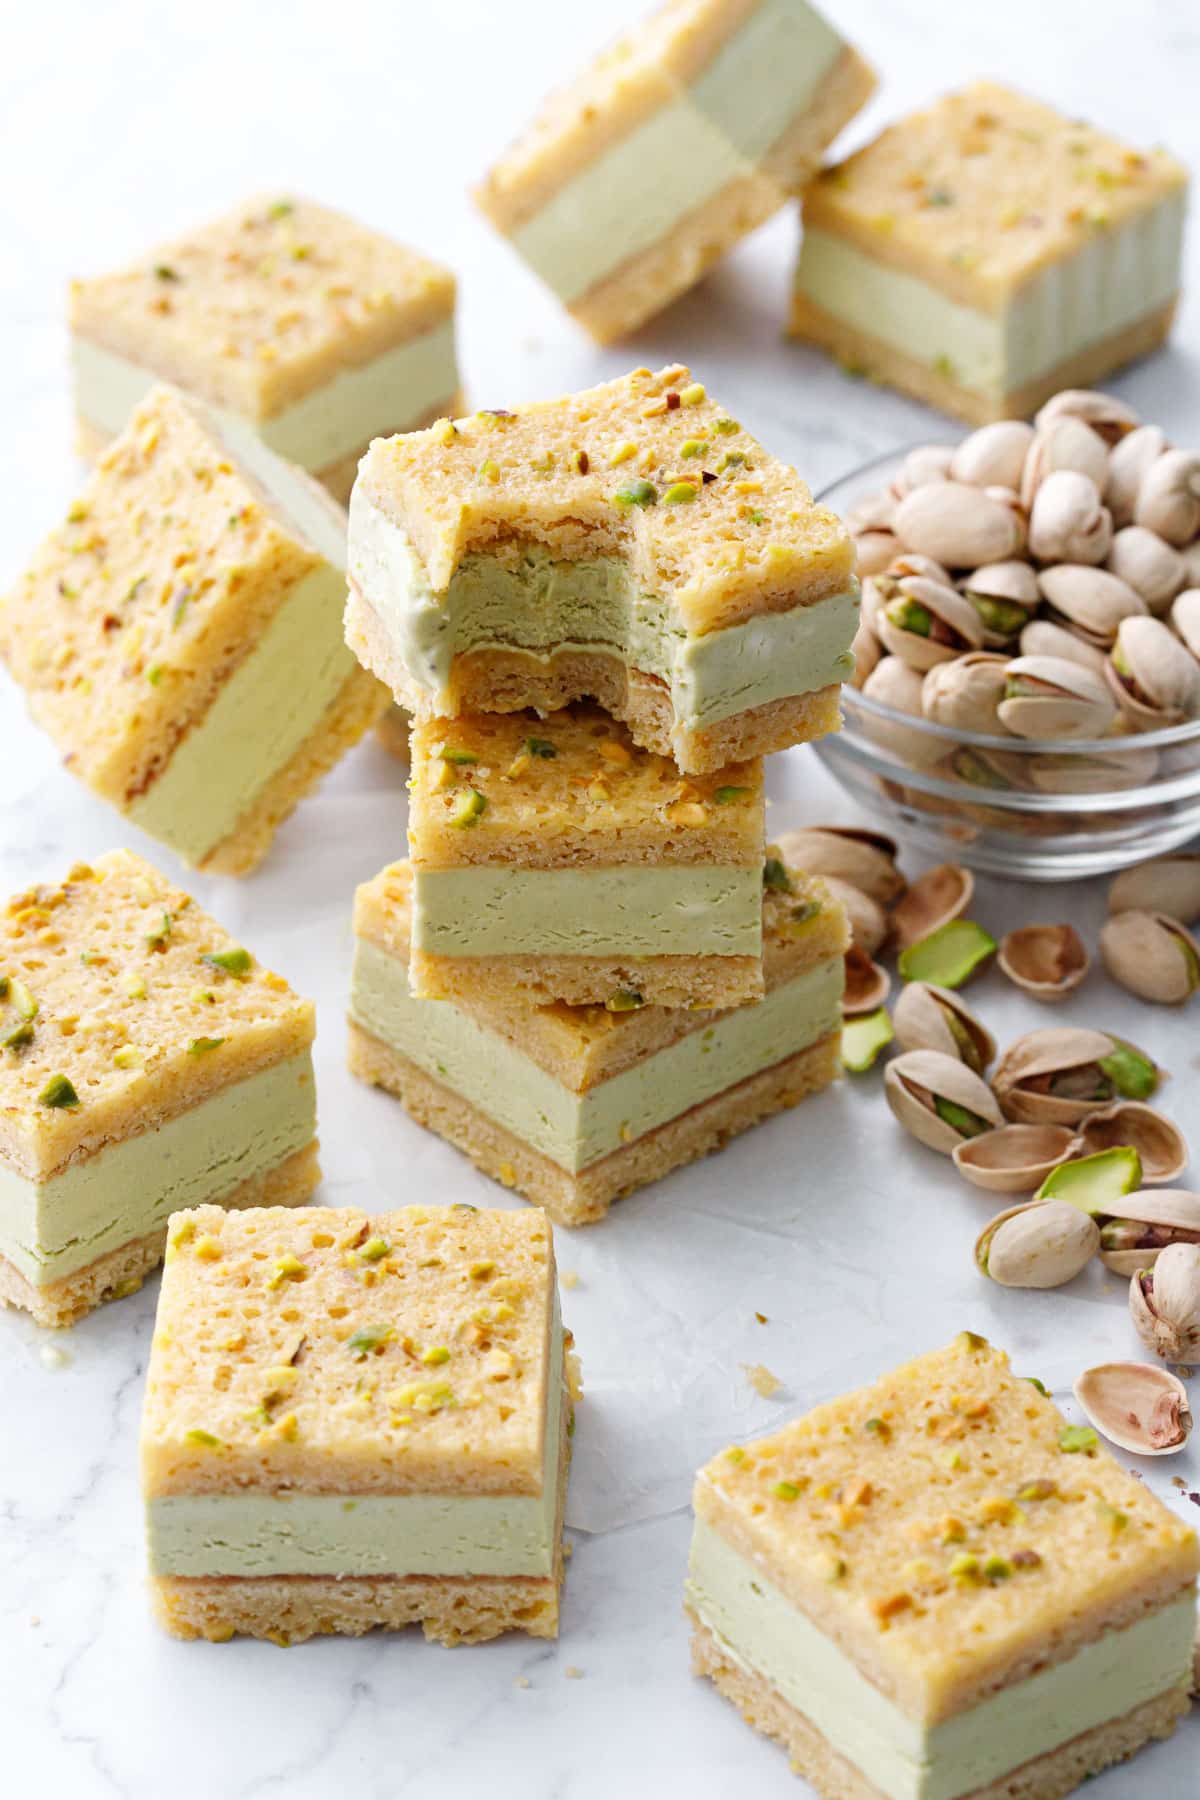 Stack of Pistachio Blondie Ice Cream Sandwiches, one with a bite cut out of it to show the texture, with a bowl of pistachios on the side.